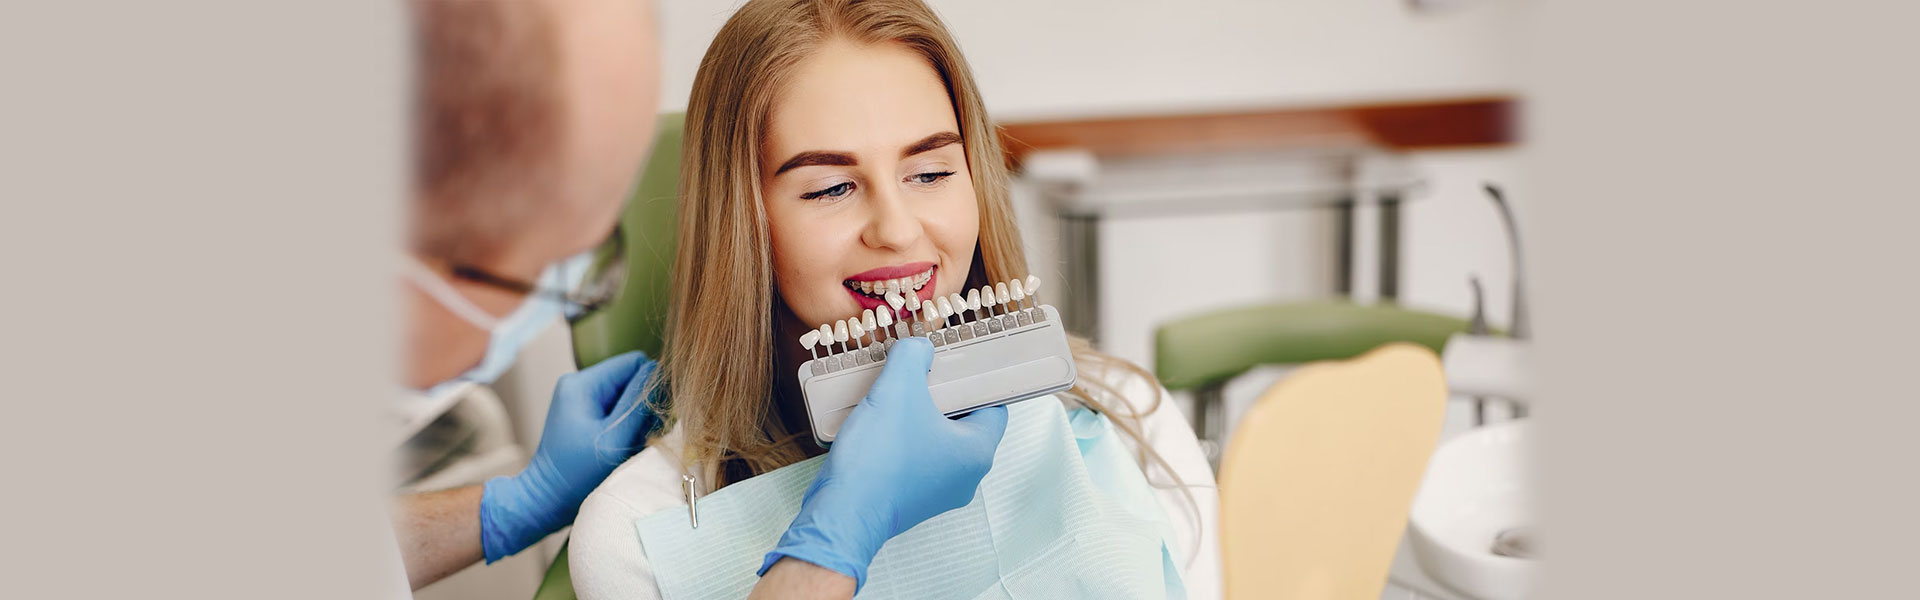 Enhance Your Smile with Dental Veneers: Pros and Cons